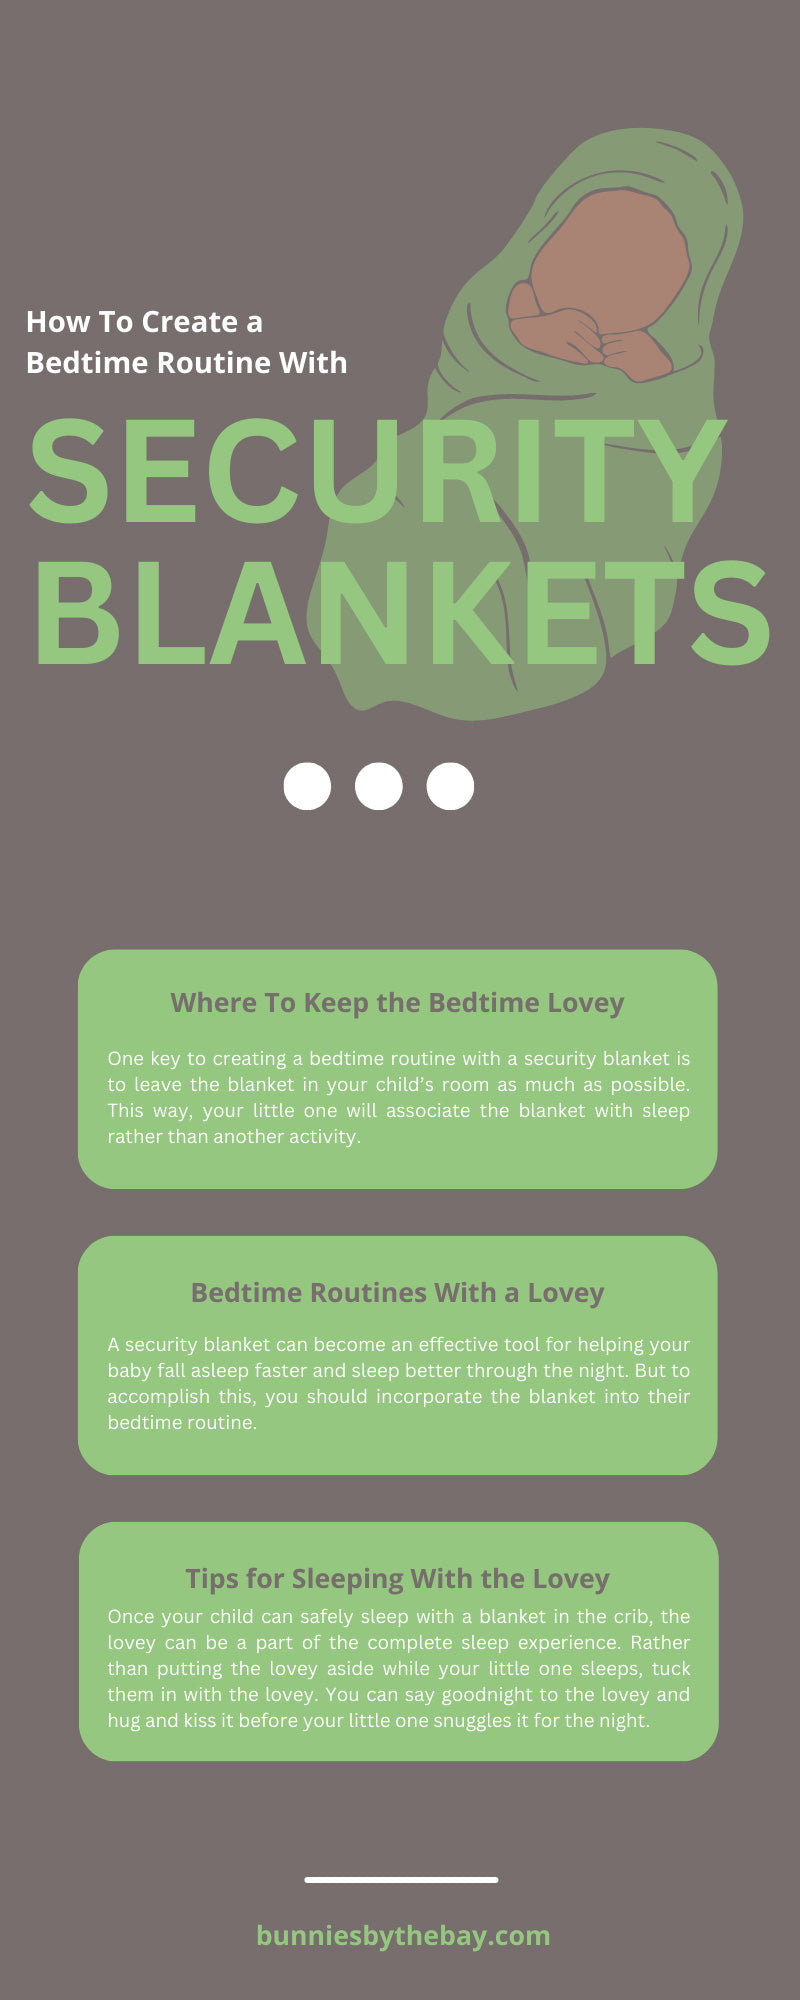 How To Create a Bedtime Routine With Security Blankets